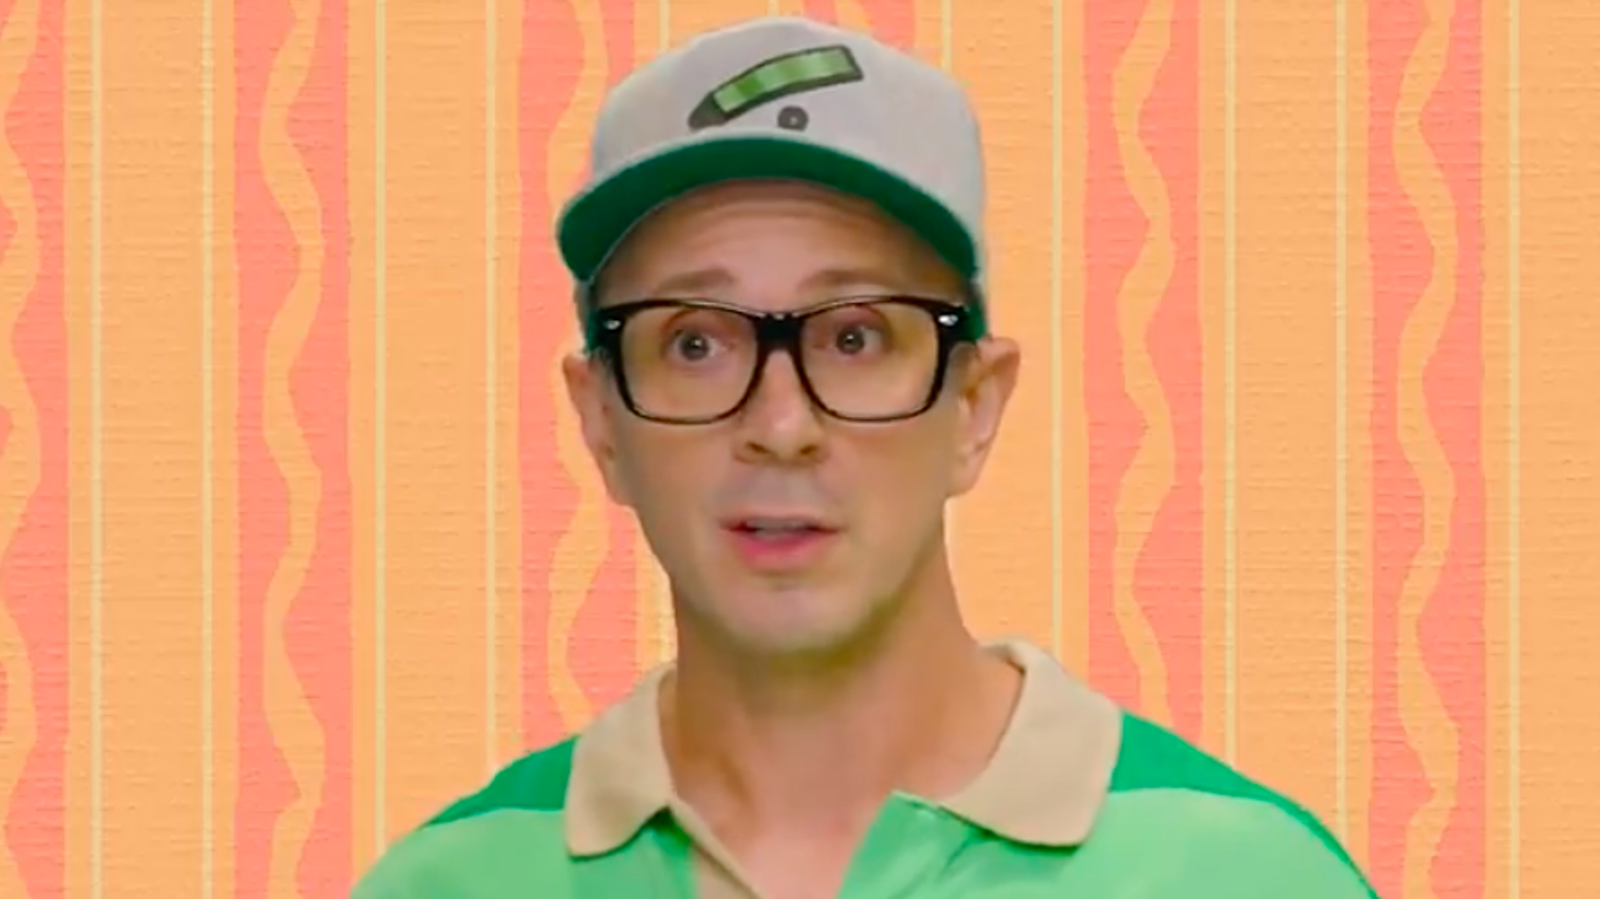 Steve from 'Blue's Clues' is on TikTok & His Latest Video is Precious